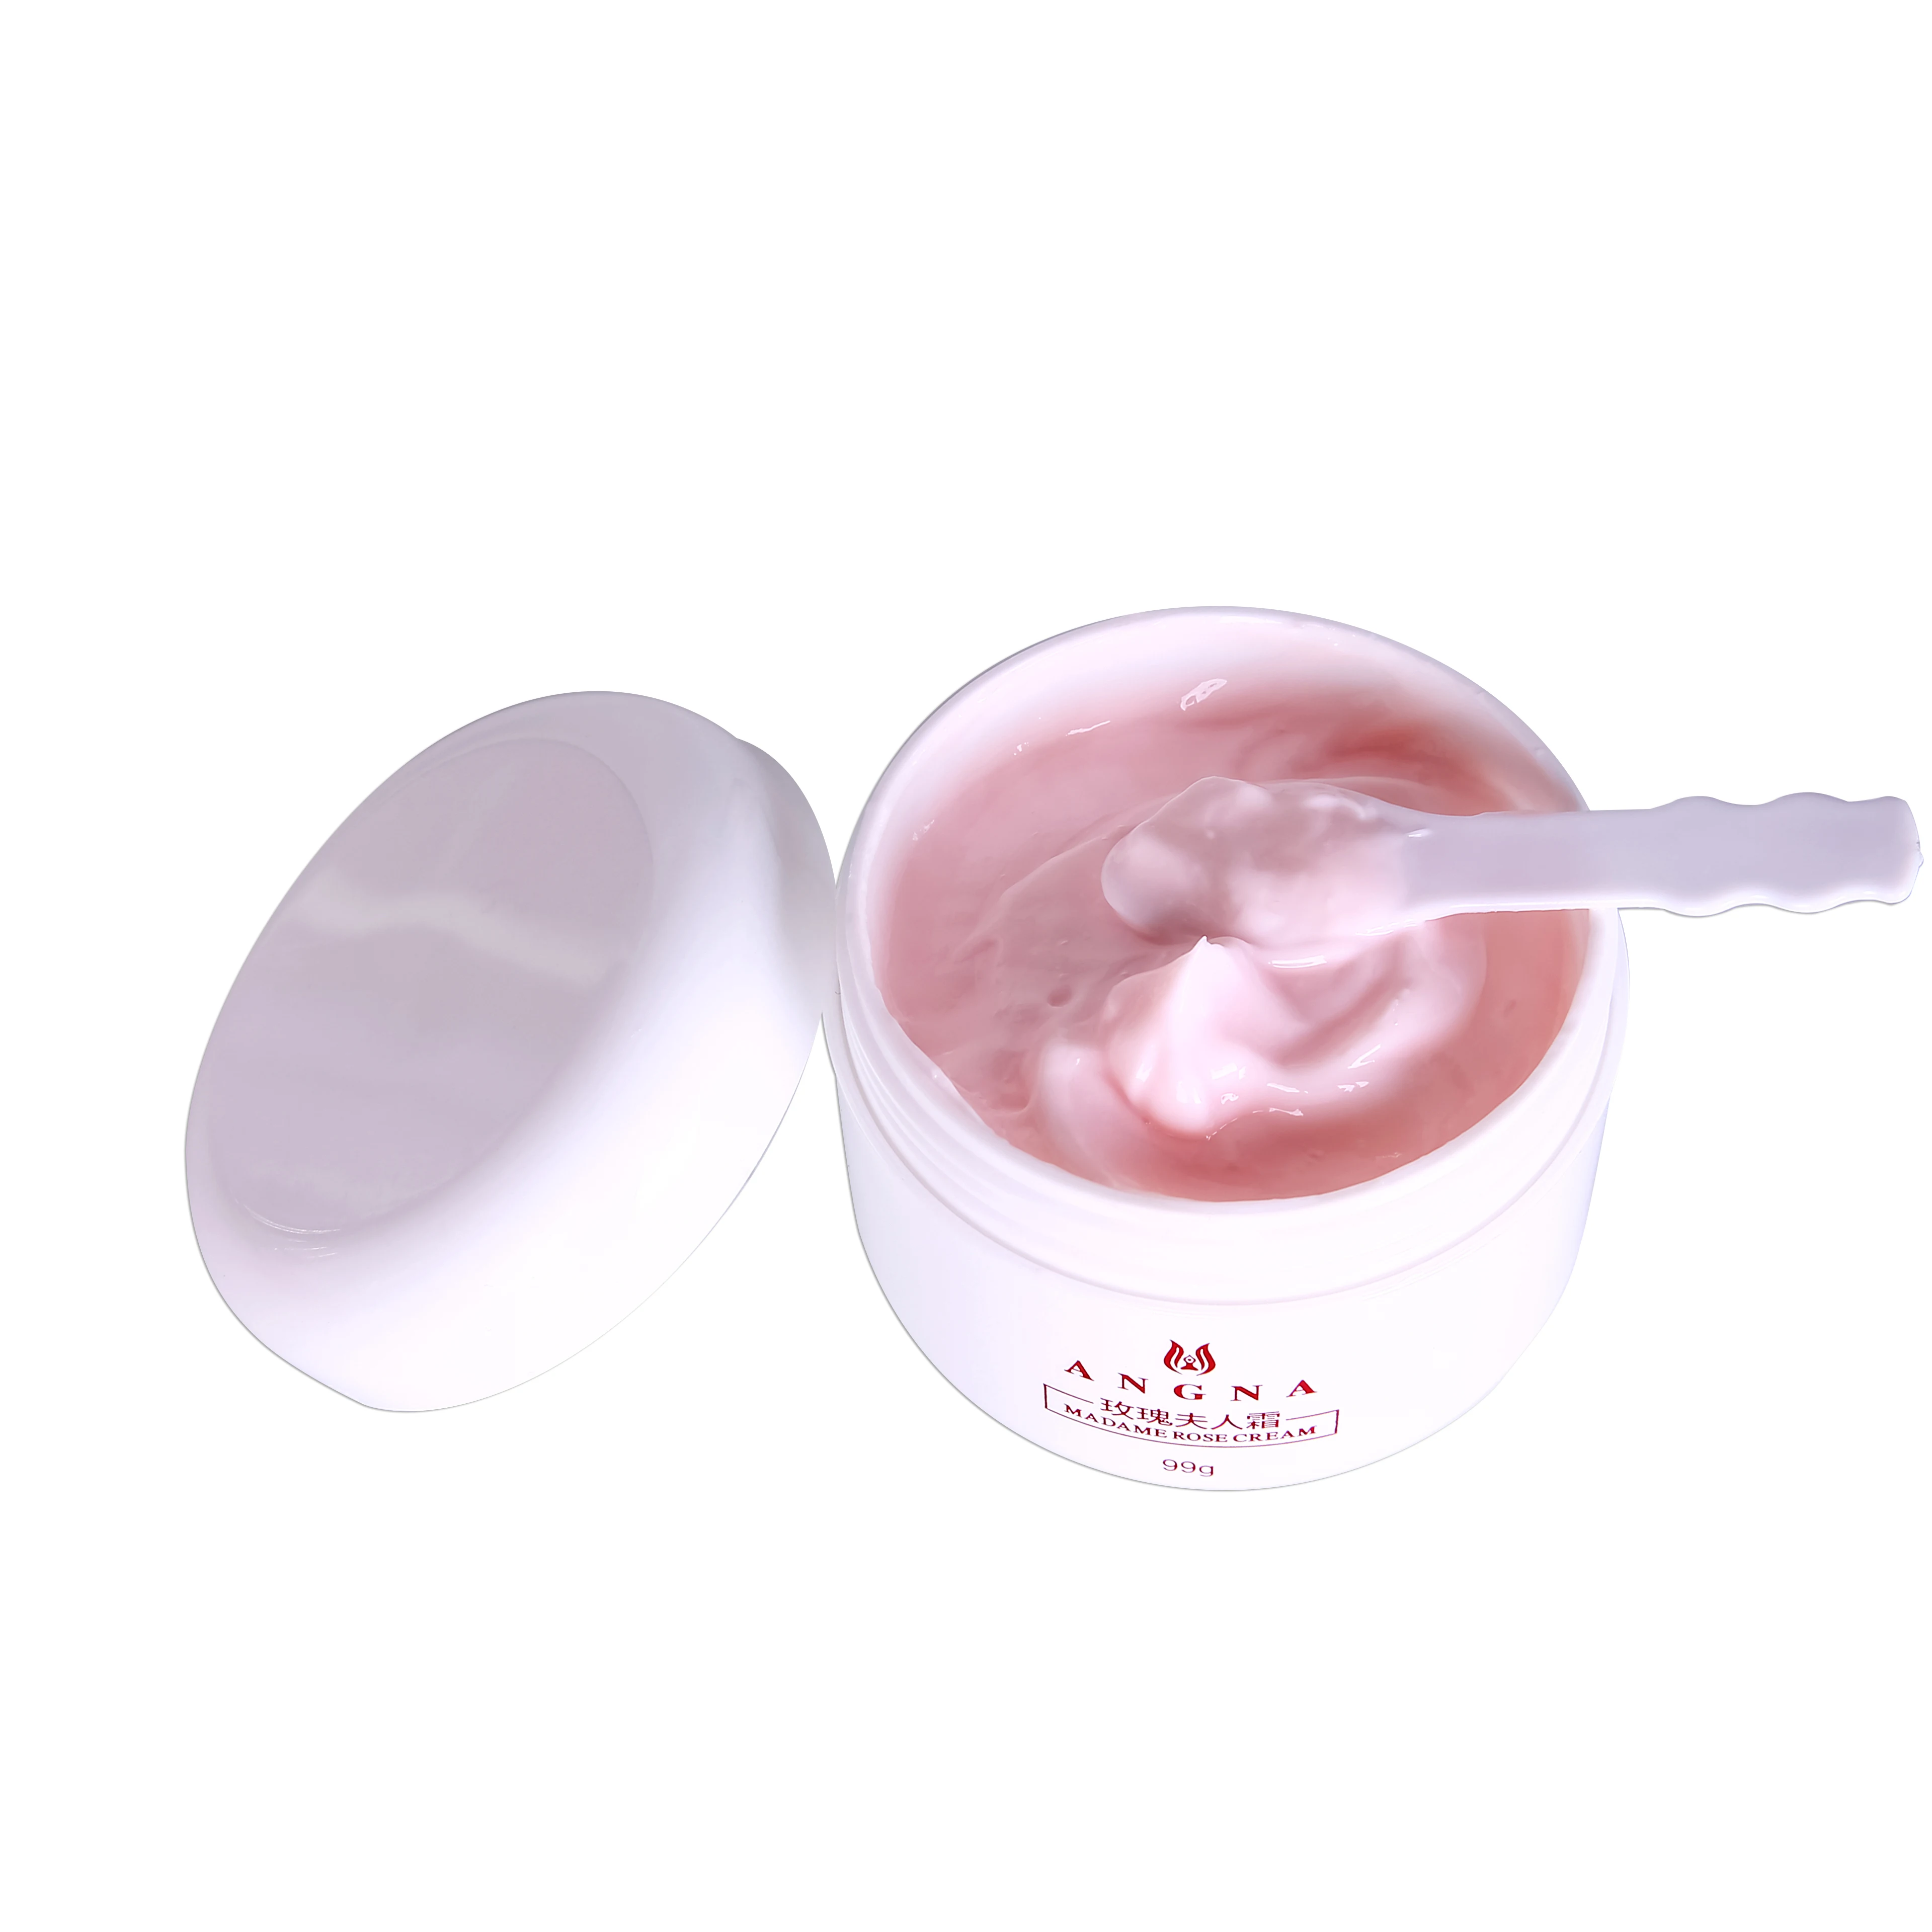 Super High Quality Rose Extract Skin Care Face Cream Whitening ...